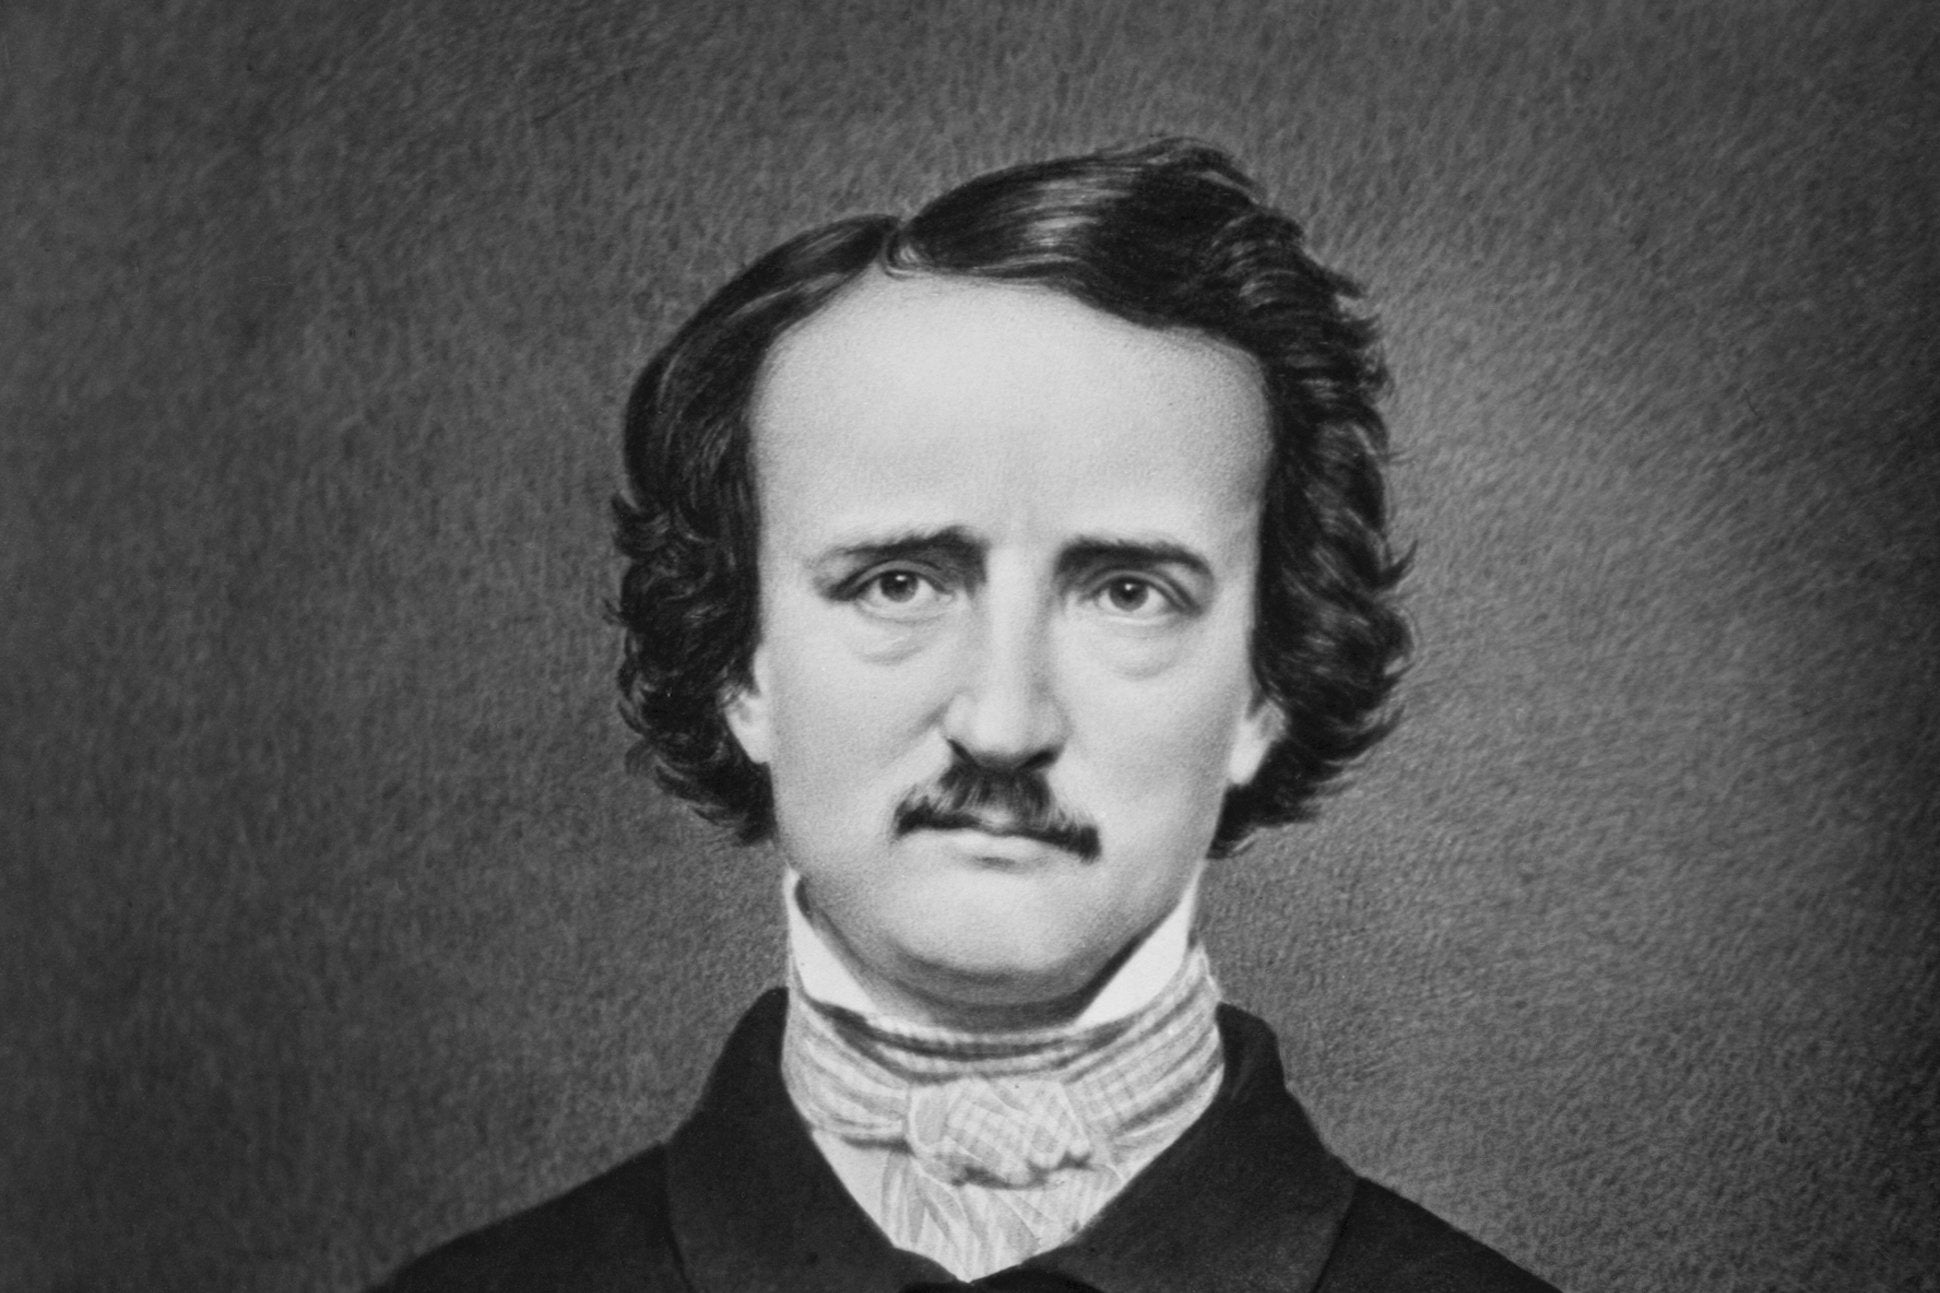 5 Fascinating Facts about Edgar Allan Poe